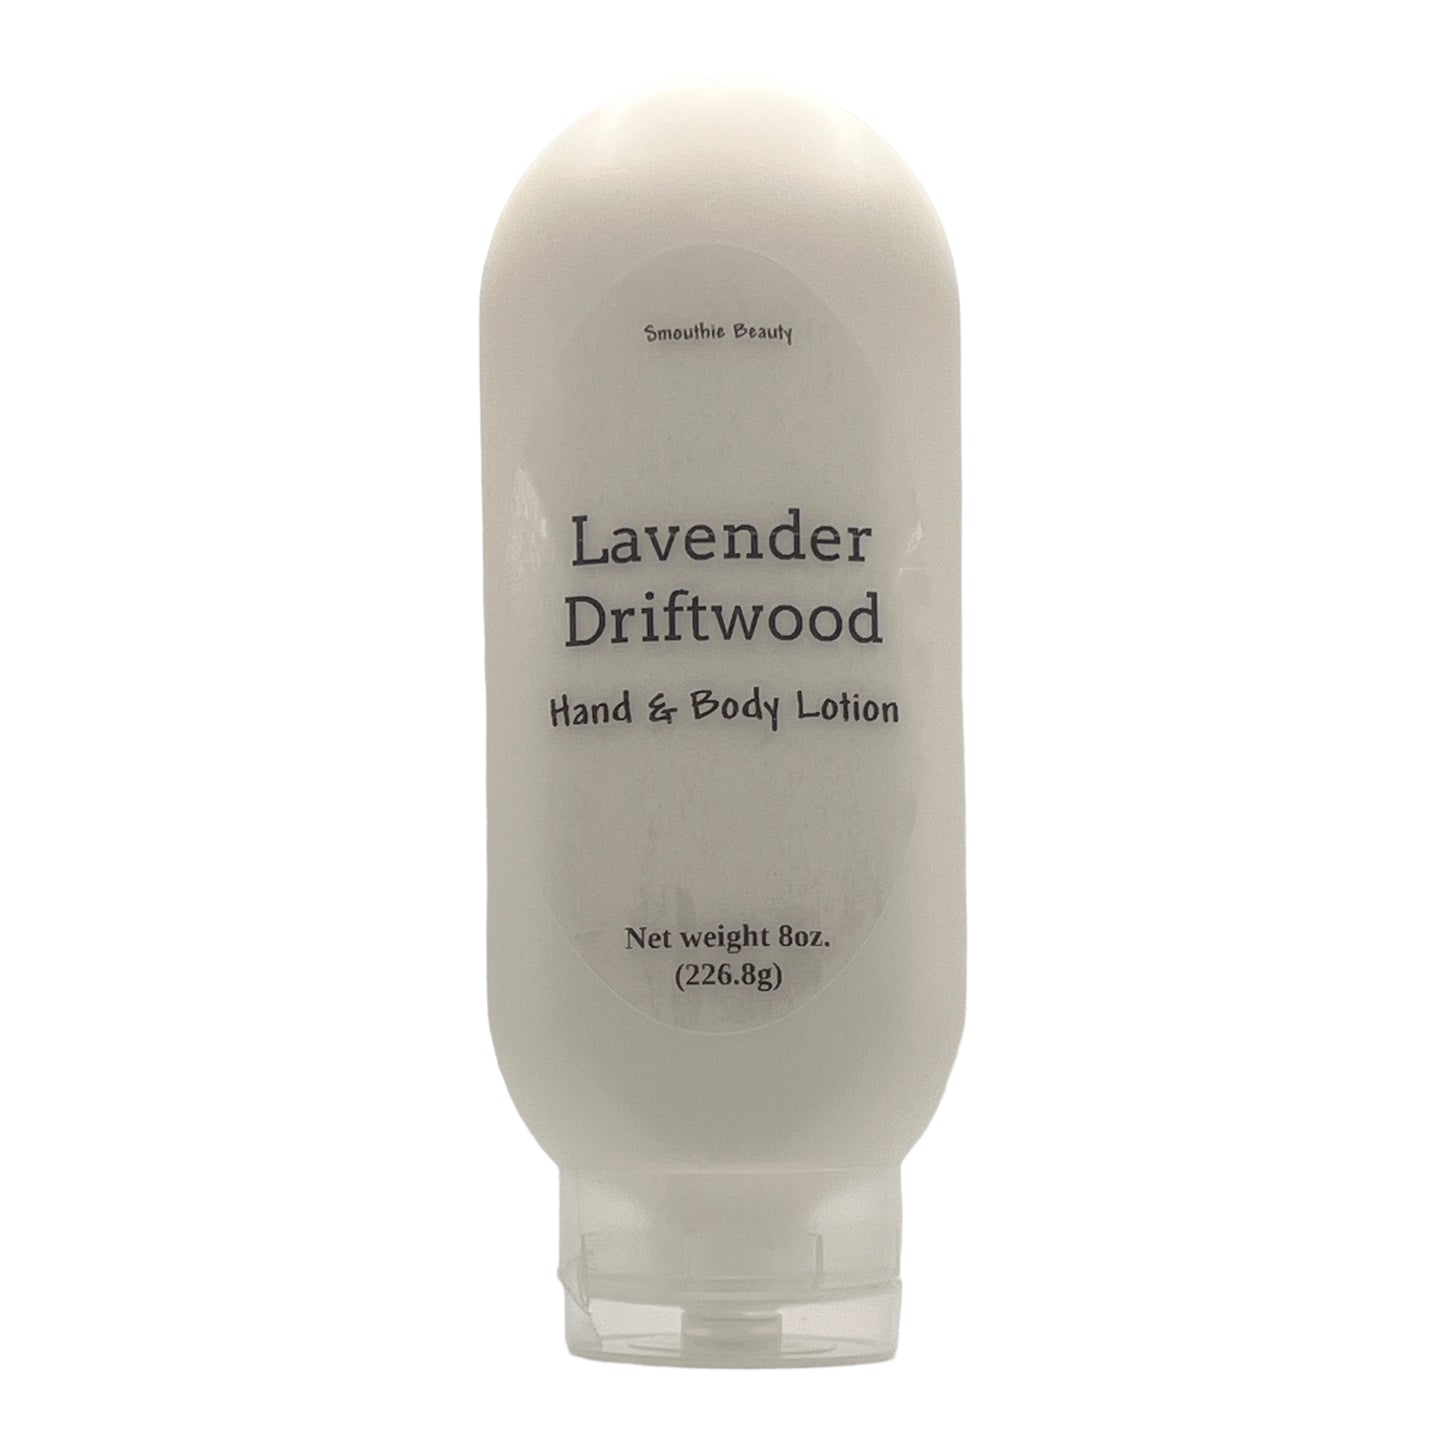 Lavender Driftwood Hand & Body Lotion